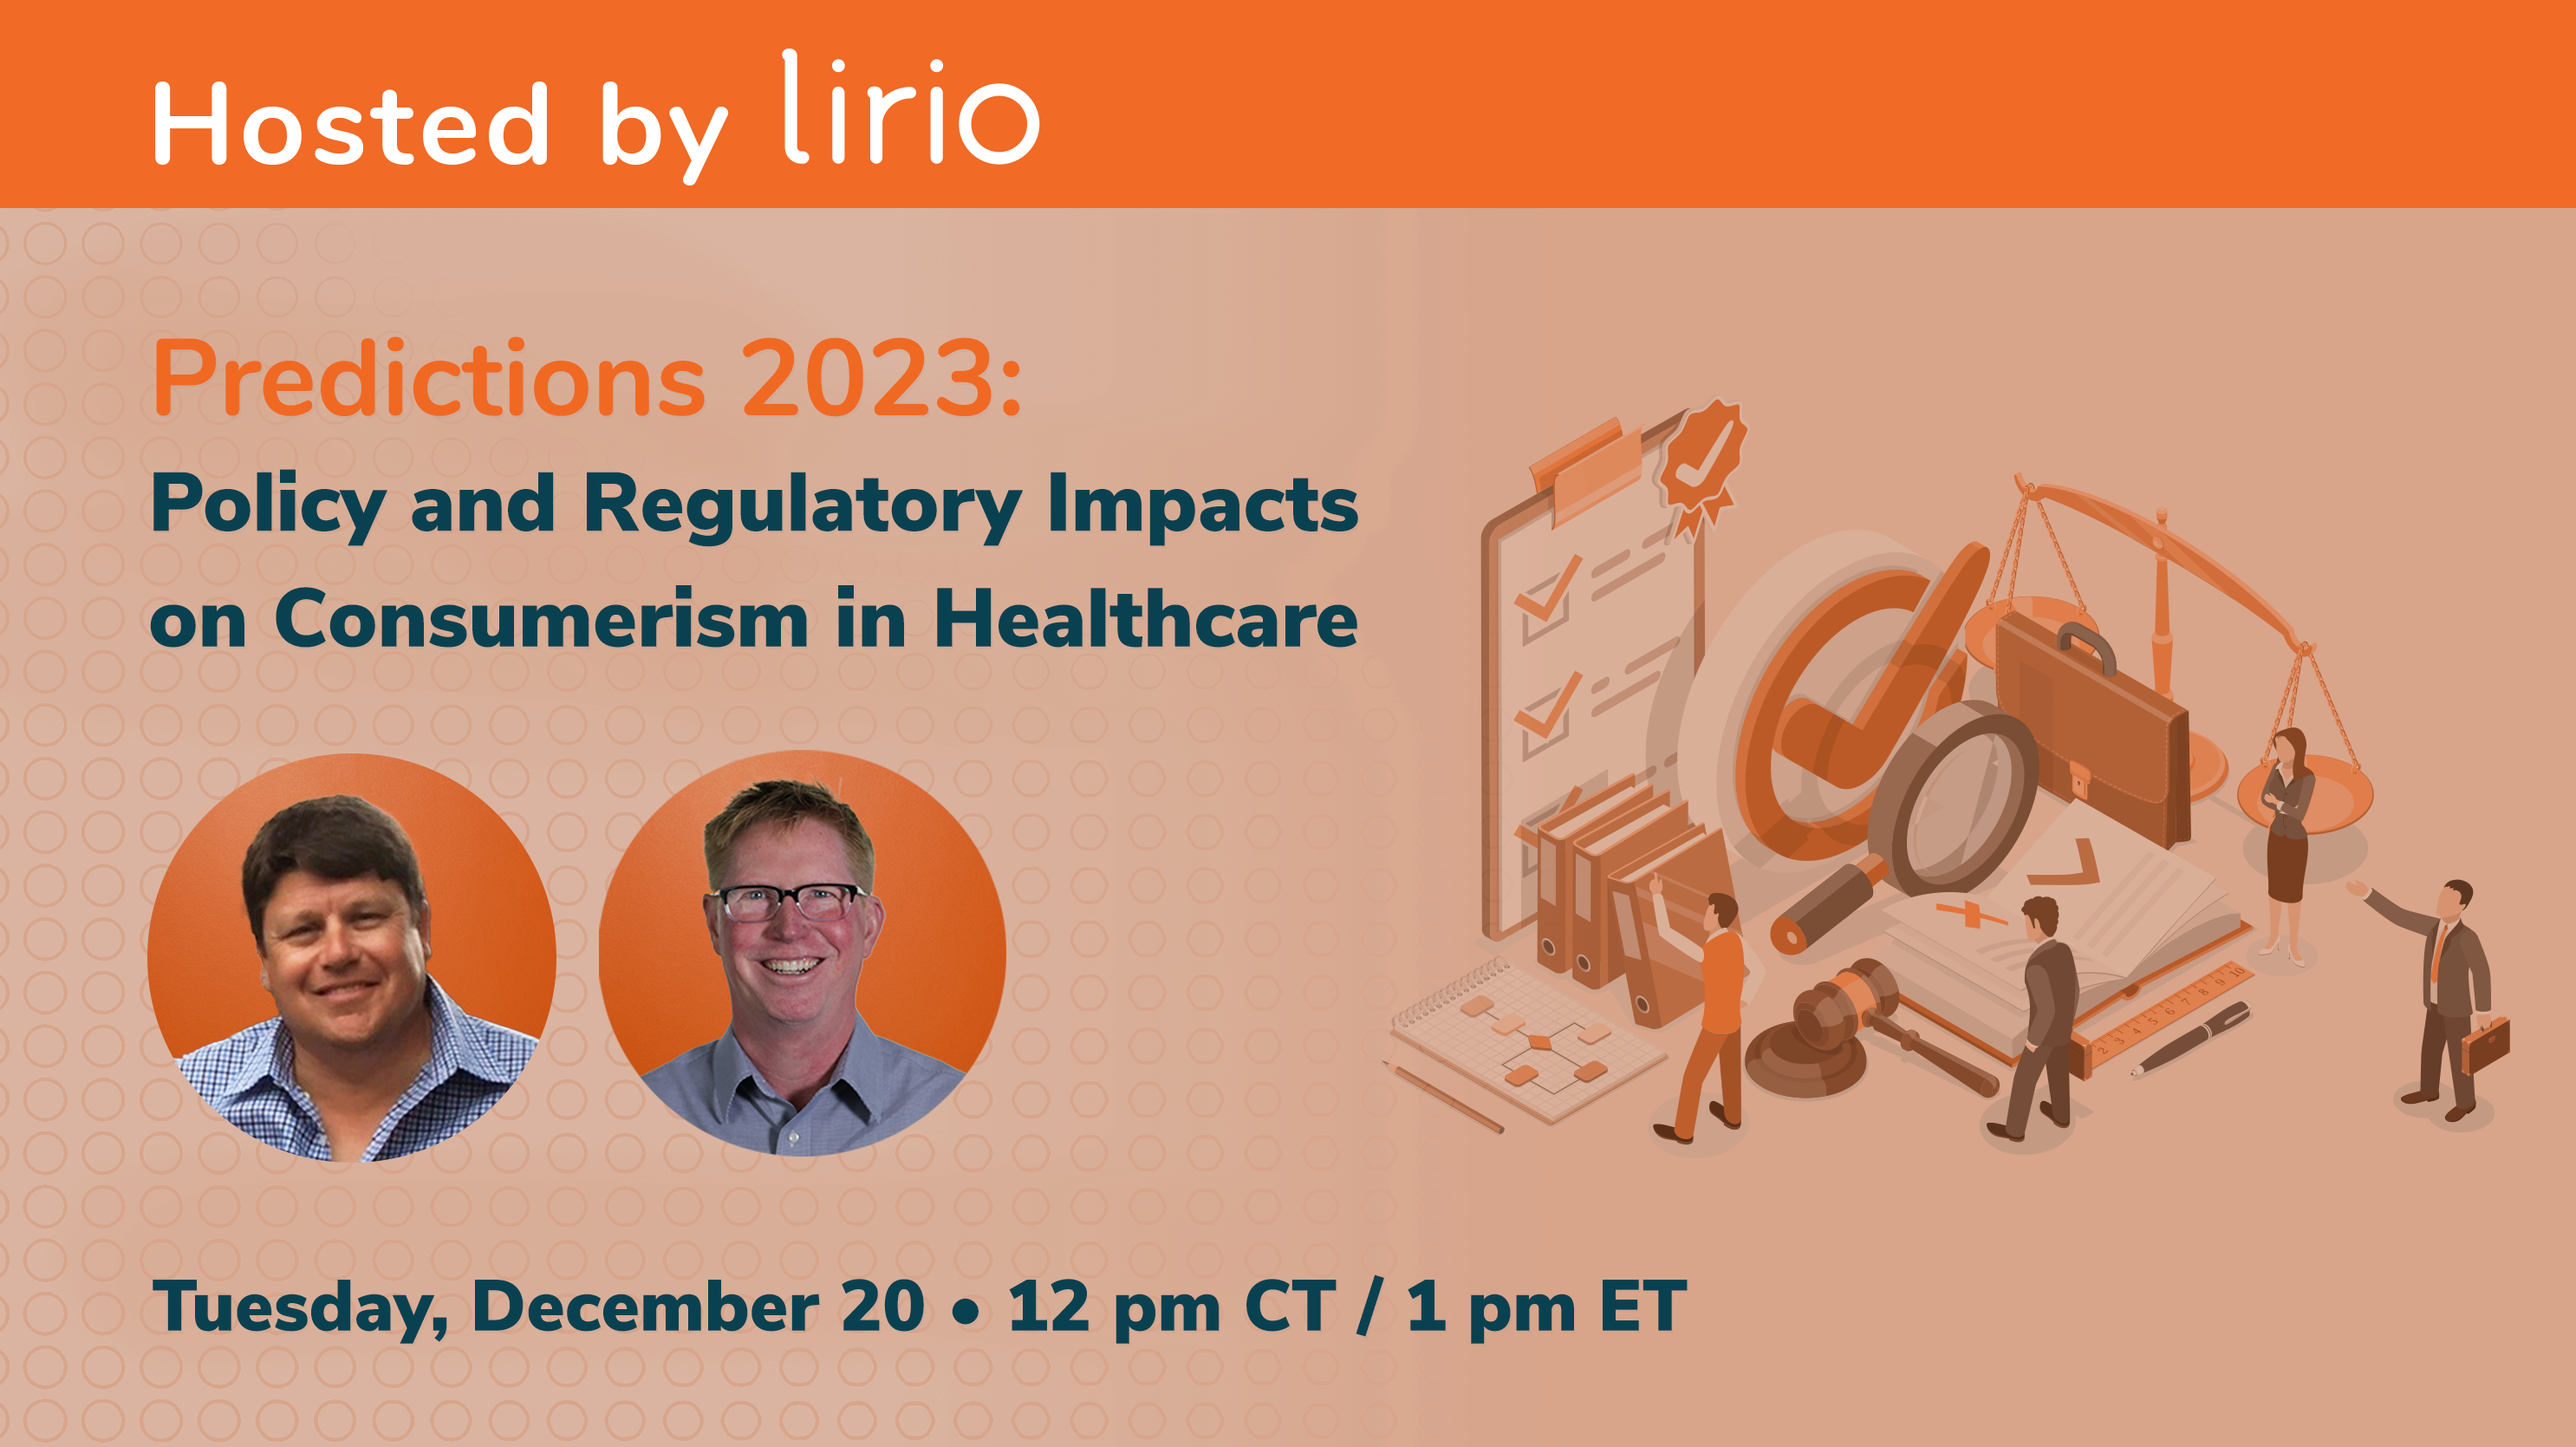 President & CEO of Health Policy Source, Dan Boston, Joins Lirio for a Webinar on December 20th, 2022